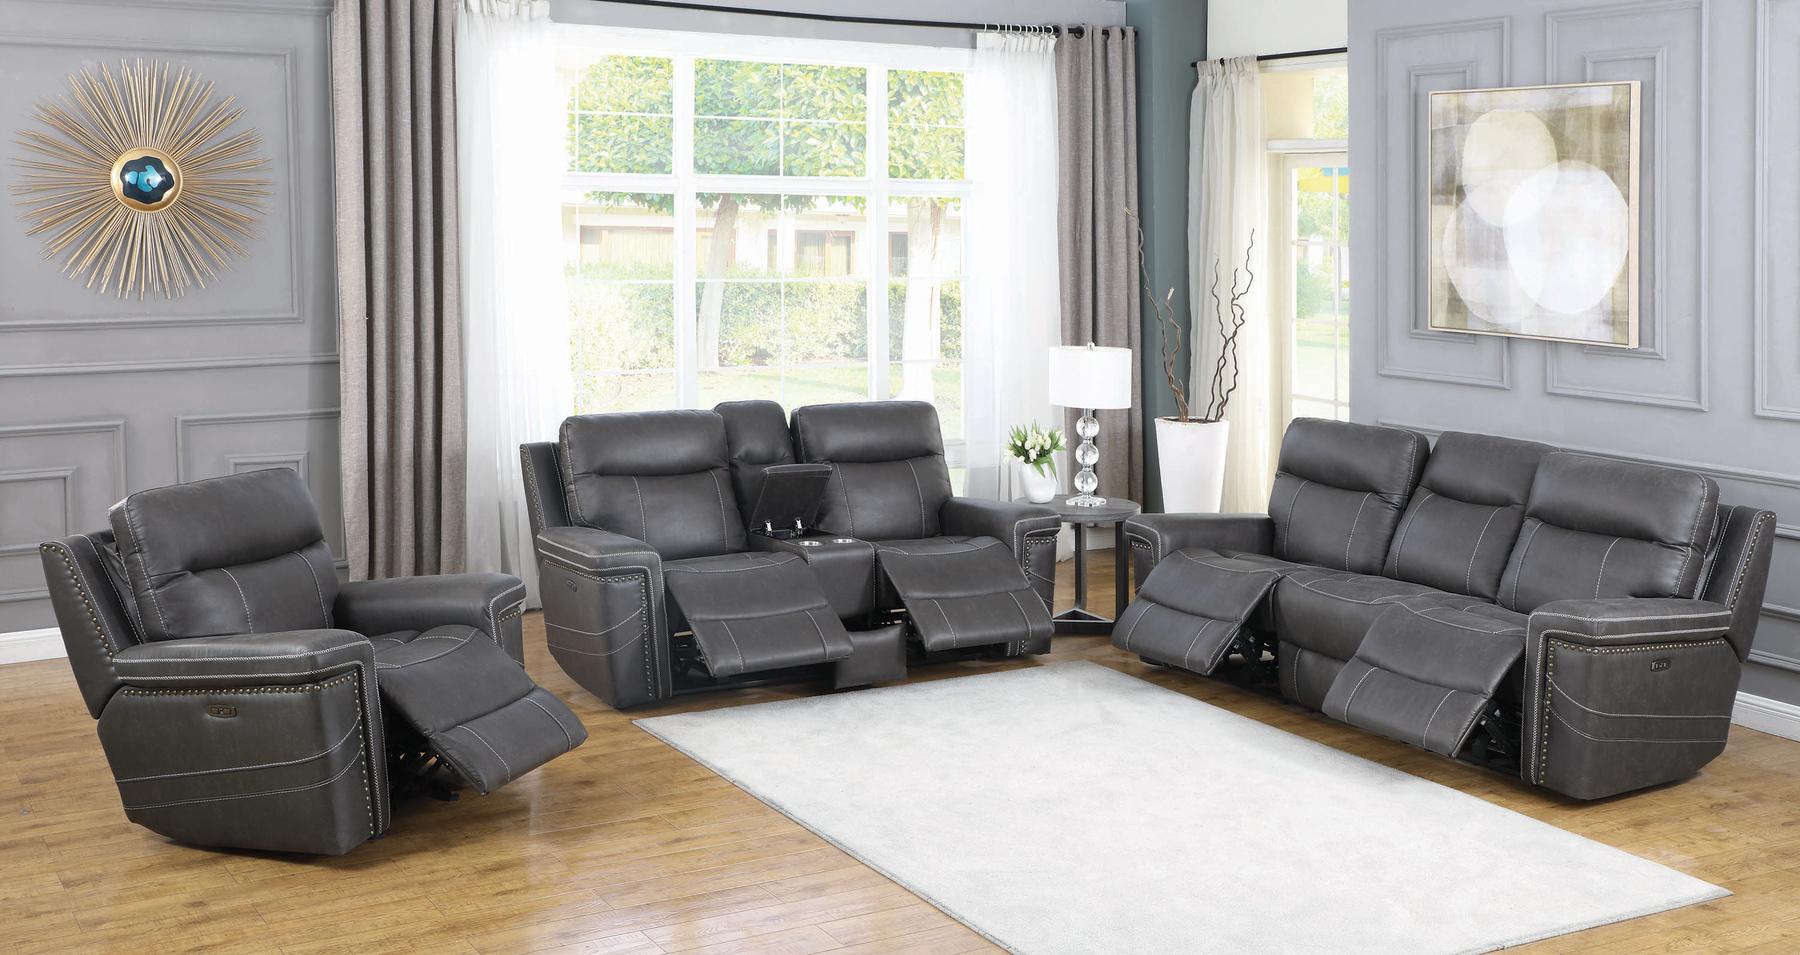 Modern Power Living Room Set 603511PP-S2 Wixom 603511PP-S2 in Charcoal 